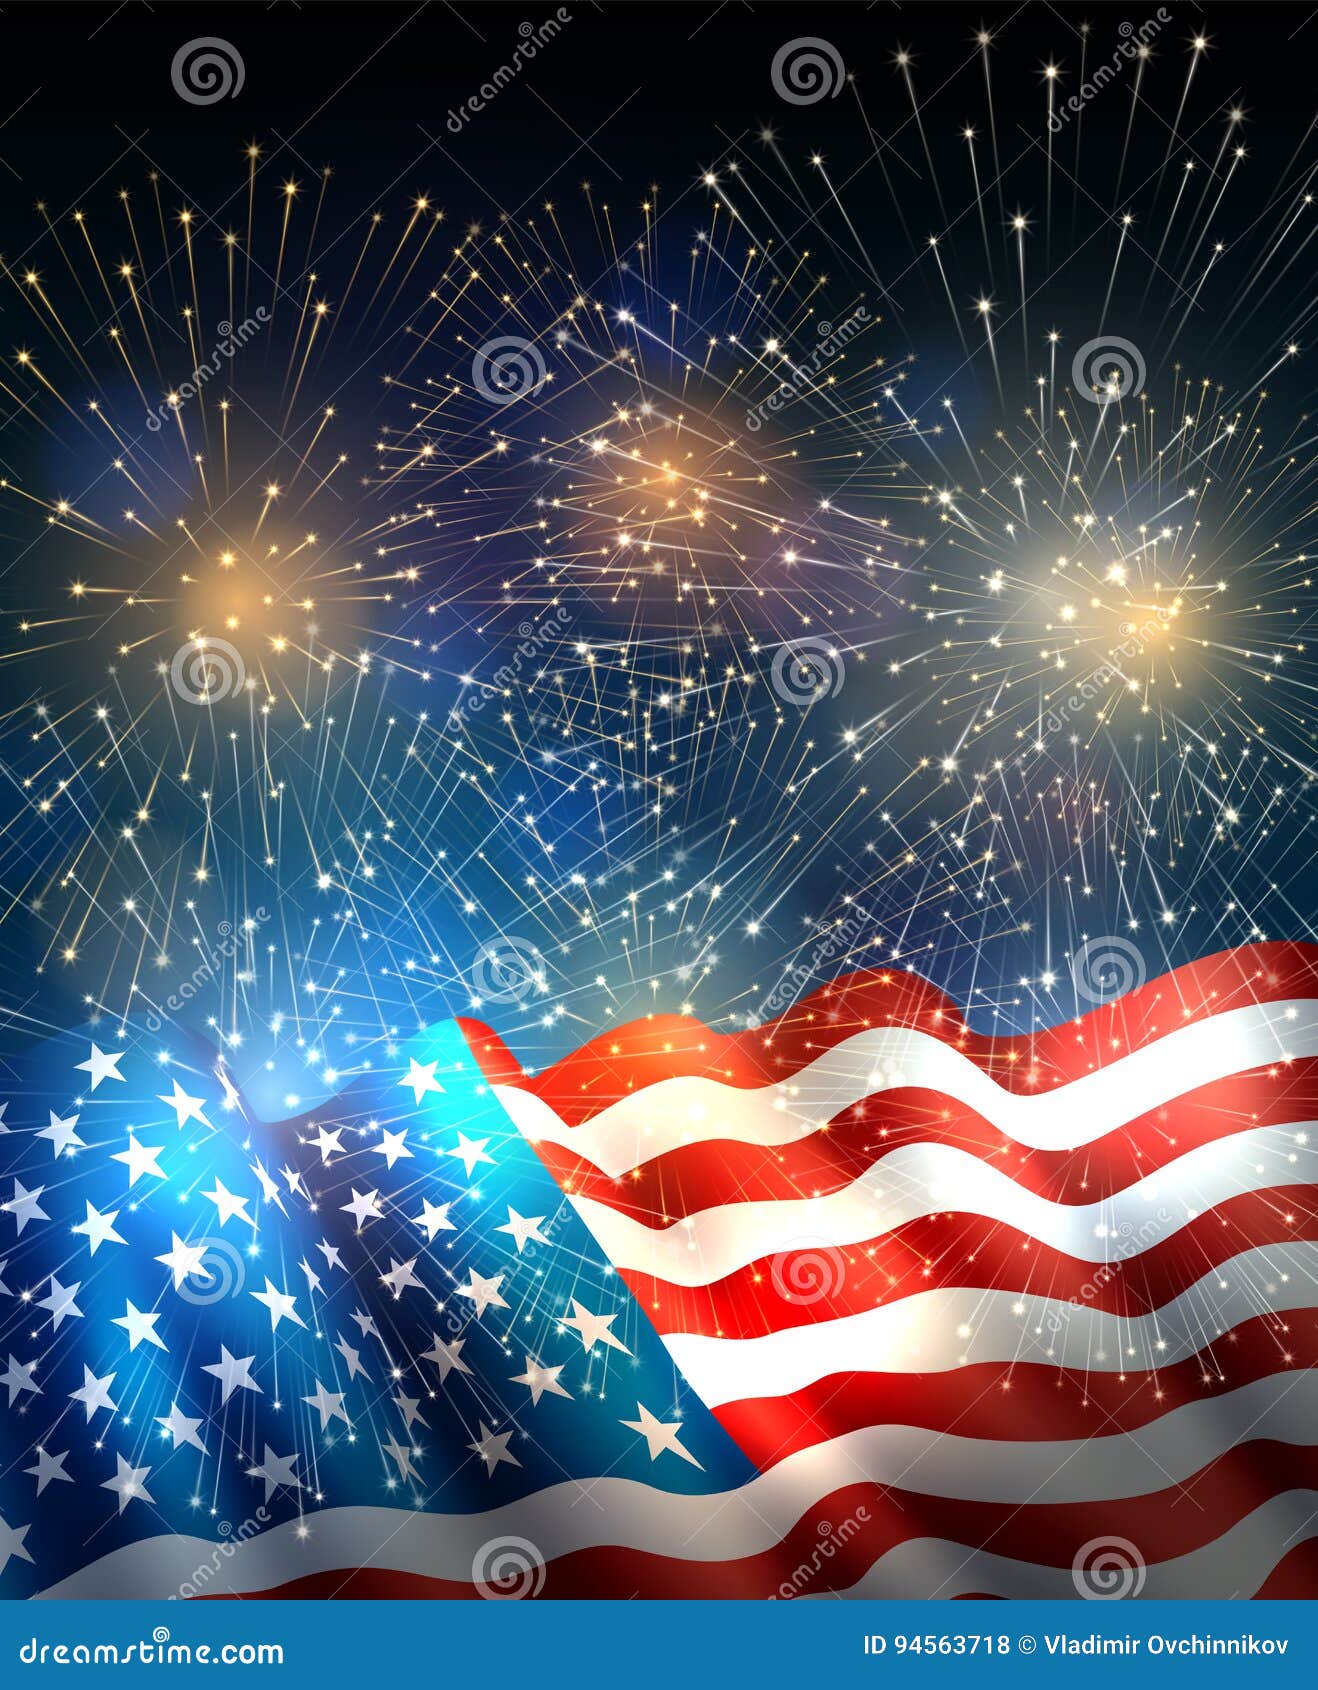 DaShan 10x8ft Independence Day American Flag Backdrop Fireworks Patriotic Bokeh Spots US Flag Photography Background 4th of July National Stars and Stripes USA National Veteran Day Photo Prop 